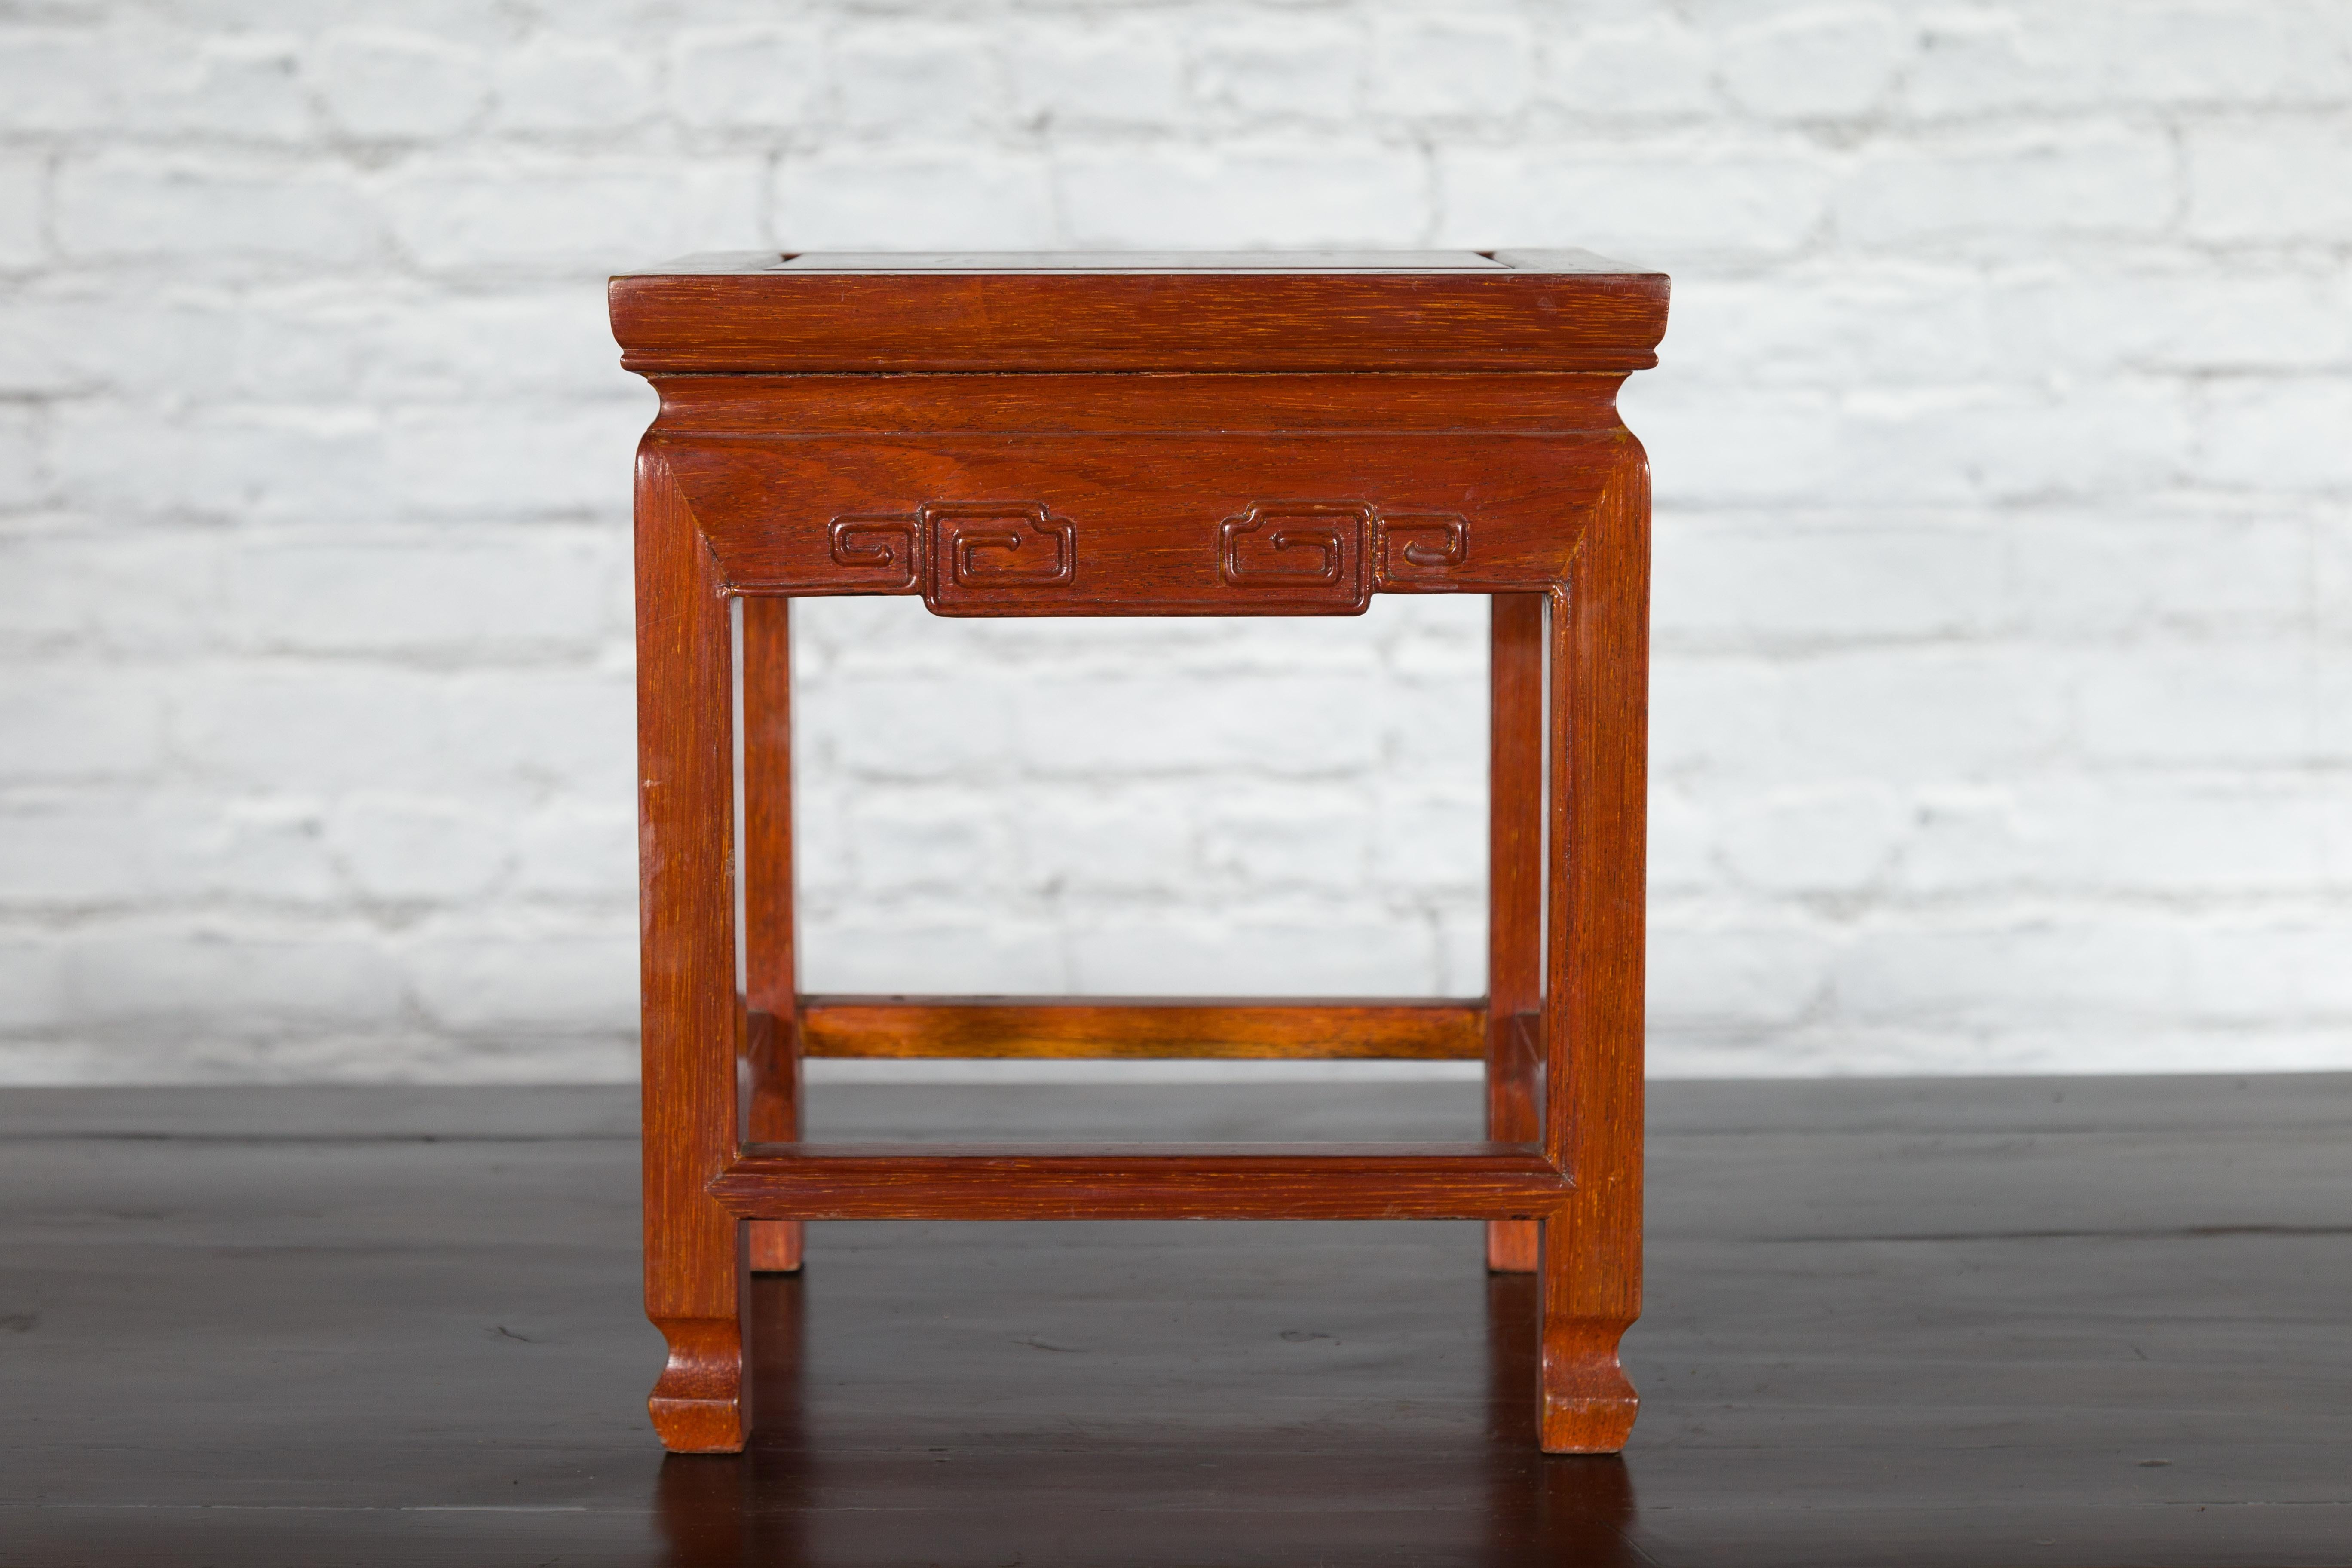 Chinese Vintage Small Stool with Scroll-Carved Apron and Side Stretchers In Good Condition For Sale In Yonkers, NY